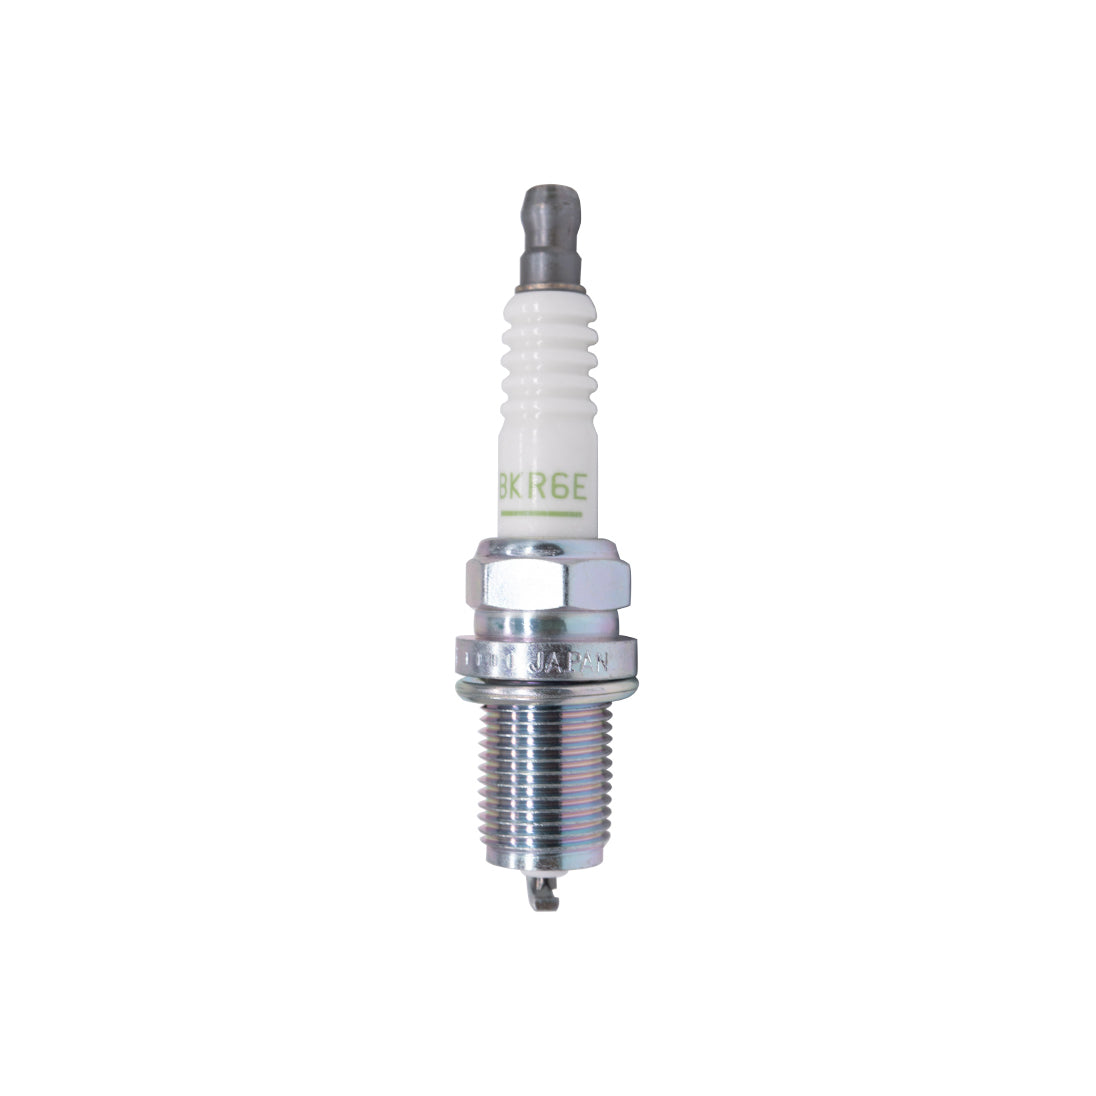 This is an NGK BKR6E 6962 Spark Plug for Evinrude/Johnson 2-Stroke outboard motors (5033634).